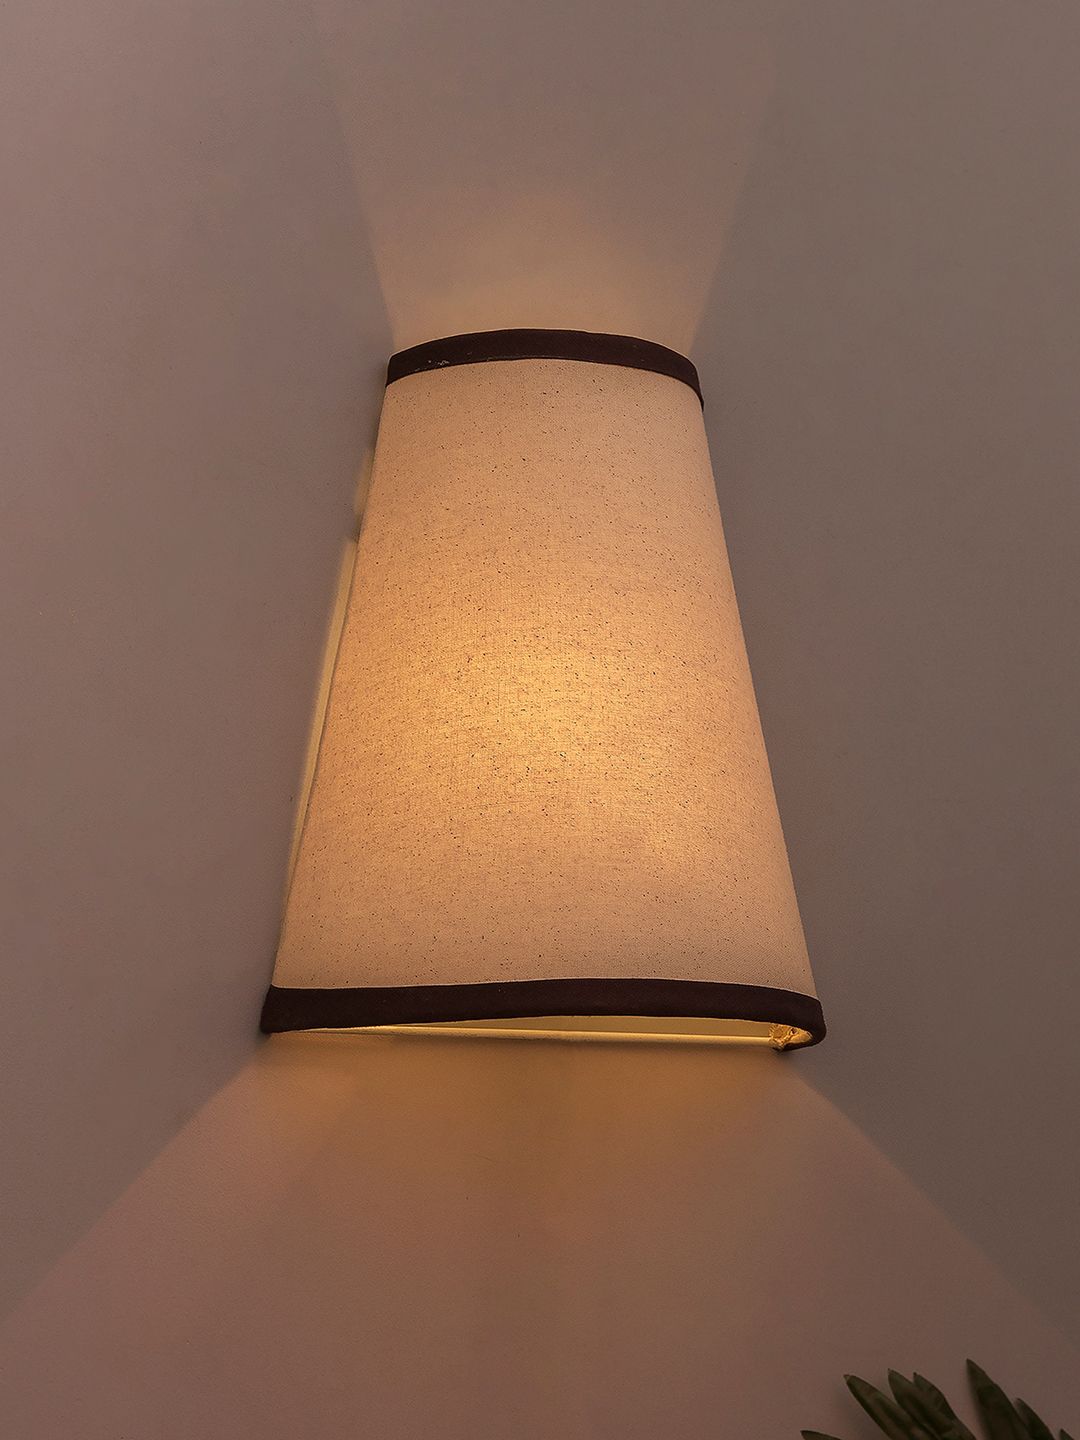 Homesake Beige Wall Mounted Sconce Shade Lamp Price in India